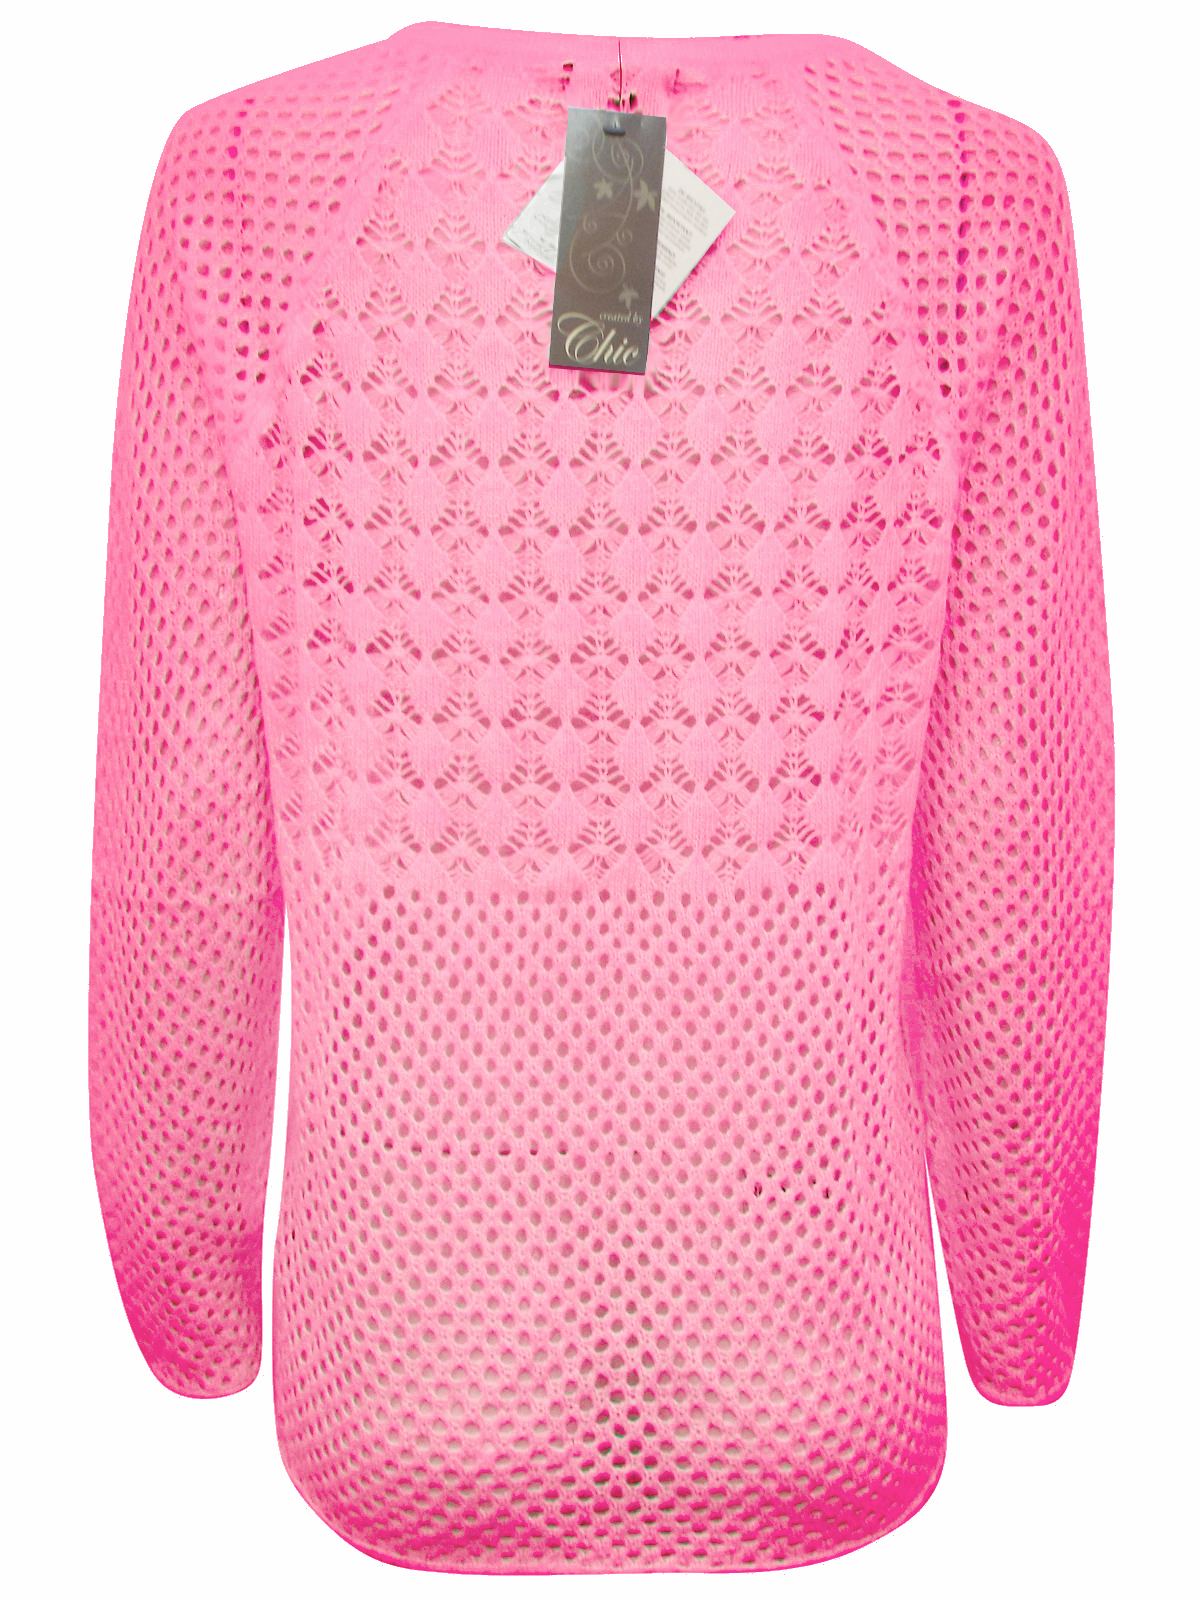 Chic - - Cellbes CORAL Open Knit Long Sleeve Jumper - Size 12/14 to 16/ ...